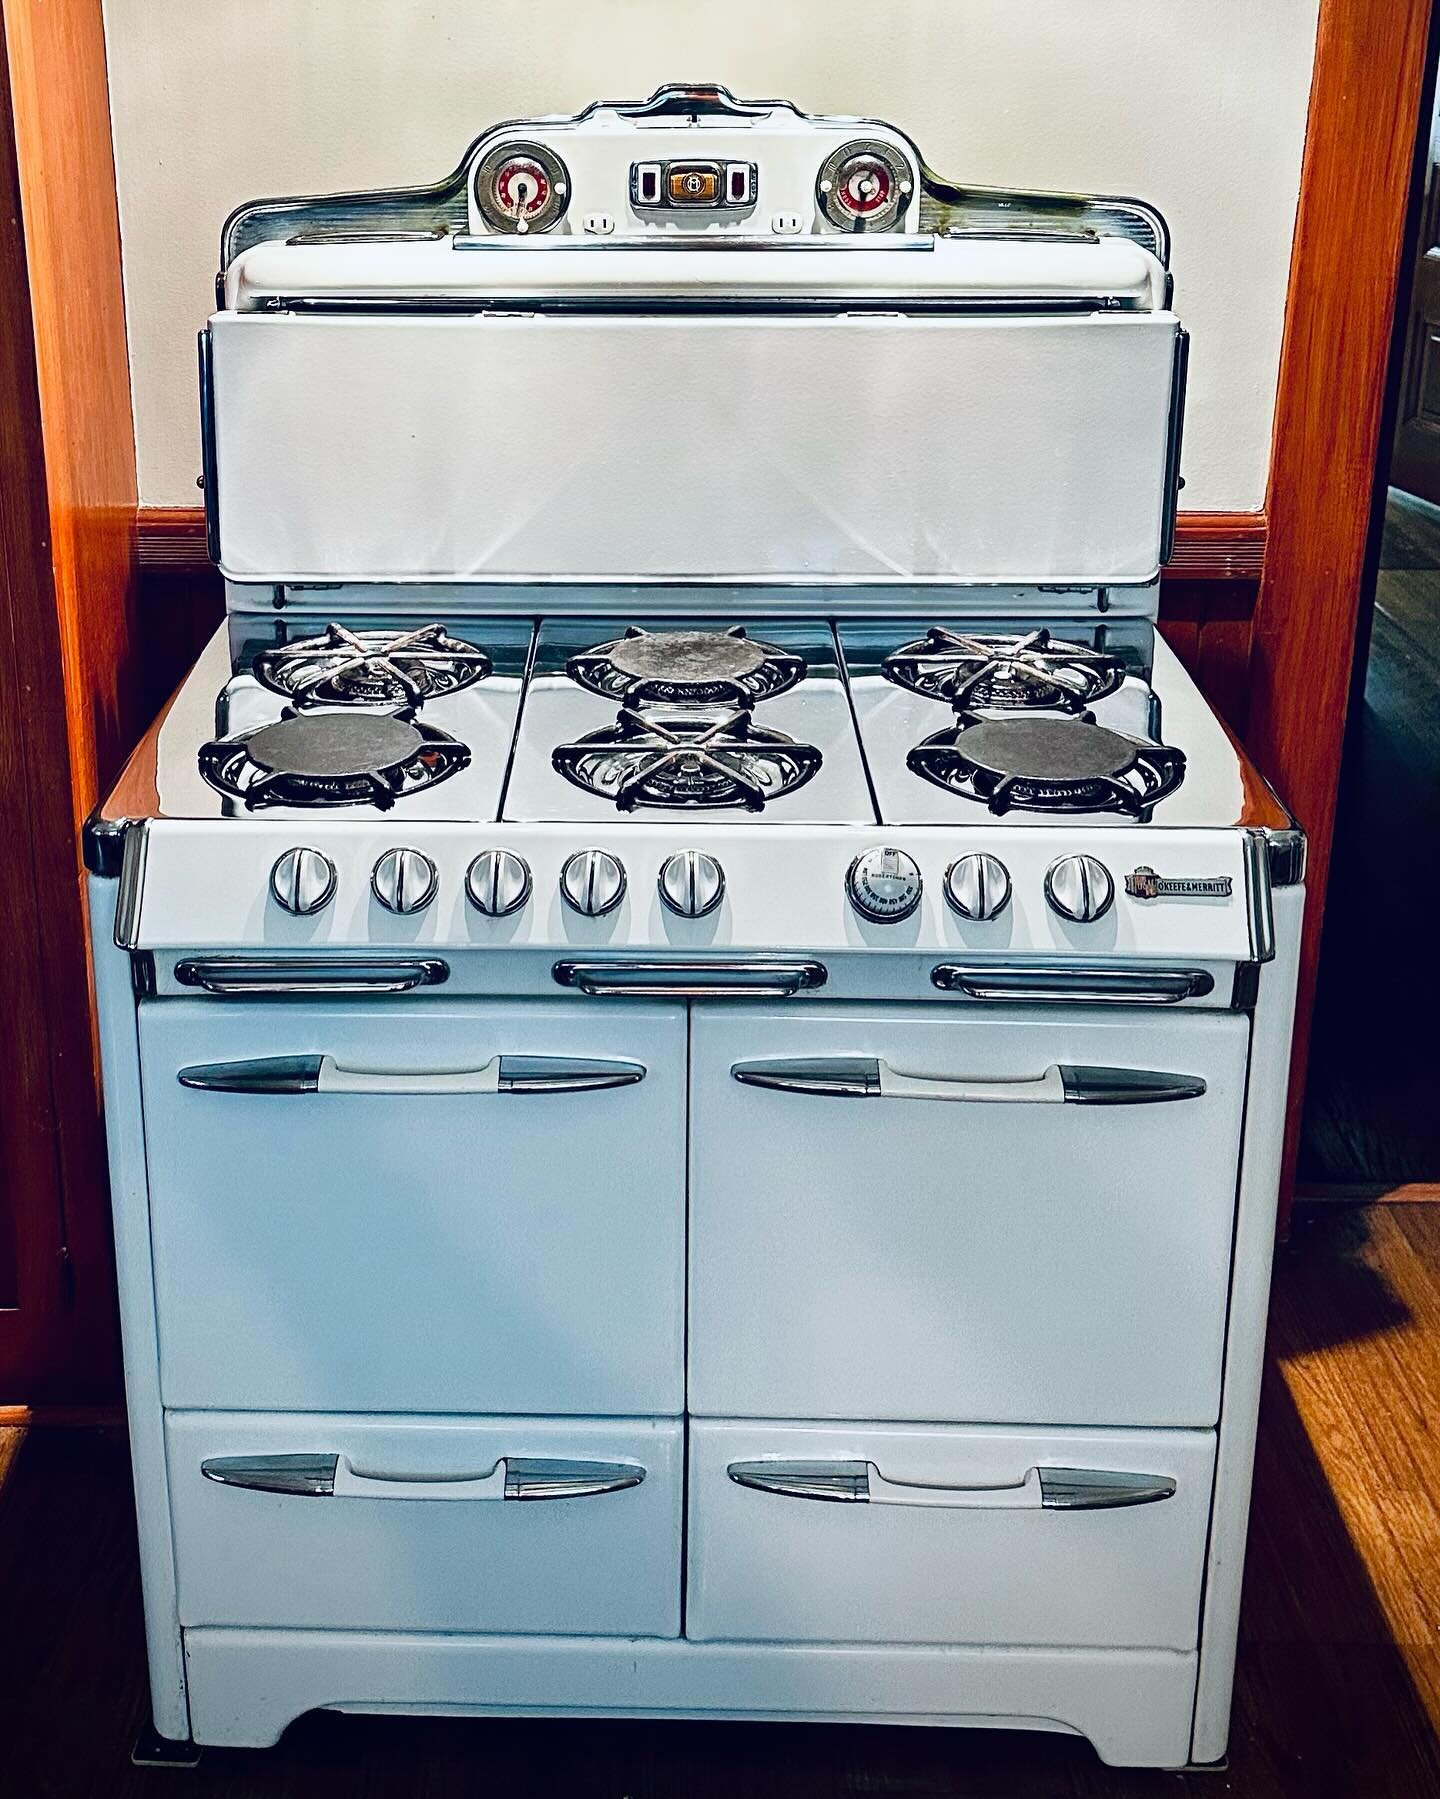 This beautiful, vintage #OKeefeAndMerritt #stove from the late #1940s has been the source of so much joy in our home. From the countless meals of #Pasta, #Pizza, #Greens, #MacAndCheese, #BeefBourguignon, #Poultry, #Fish and so much more, she has held